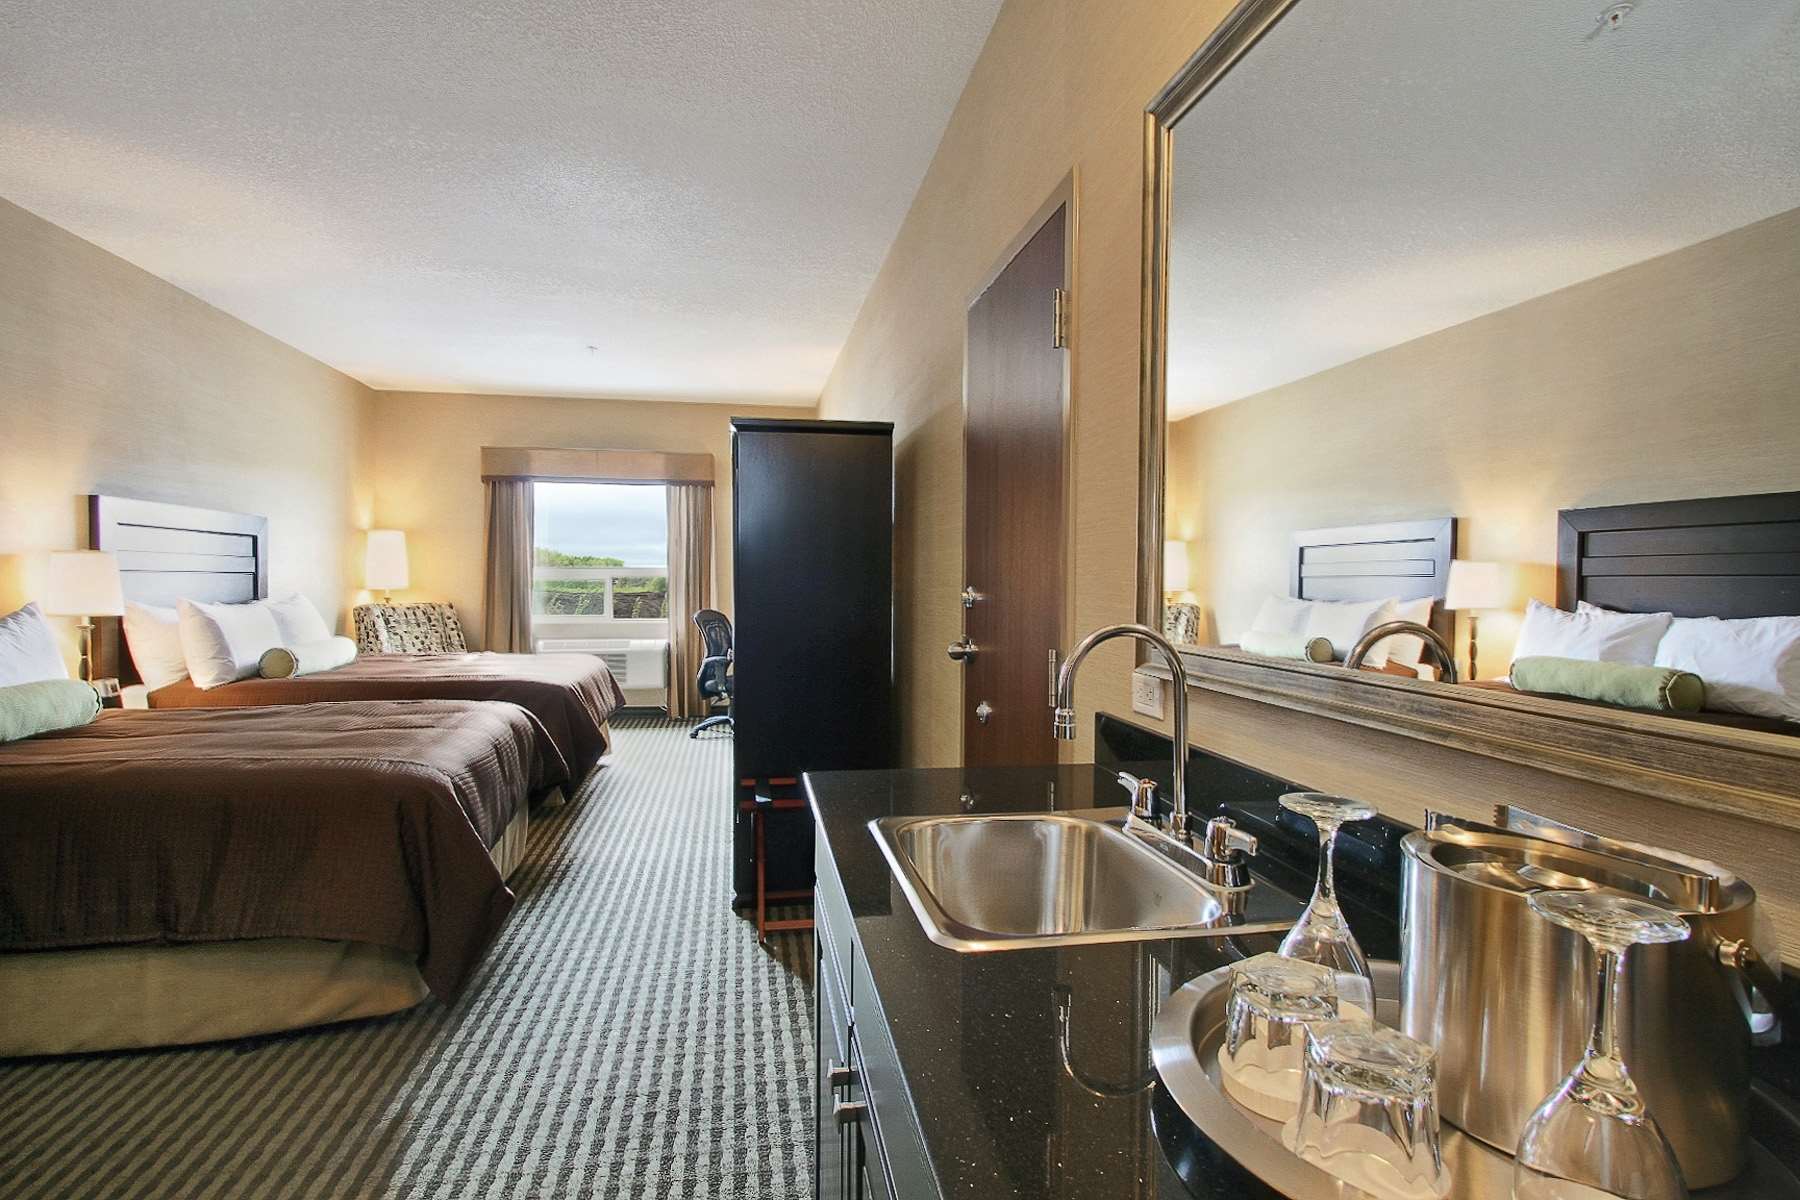 Two Queen Bed Guest Room Best Western Sunrise Inn & Suites Stony Plain (780)968-1716